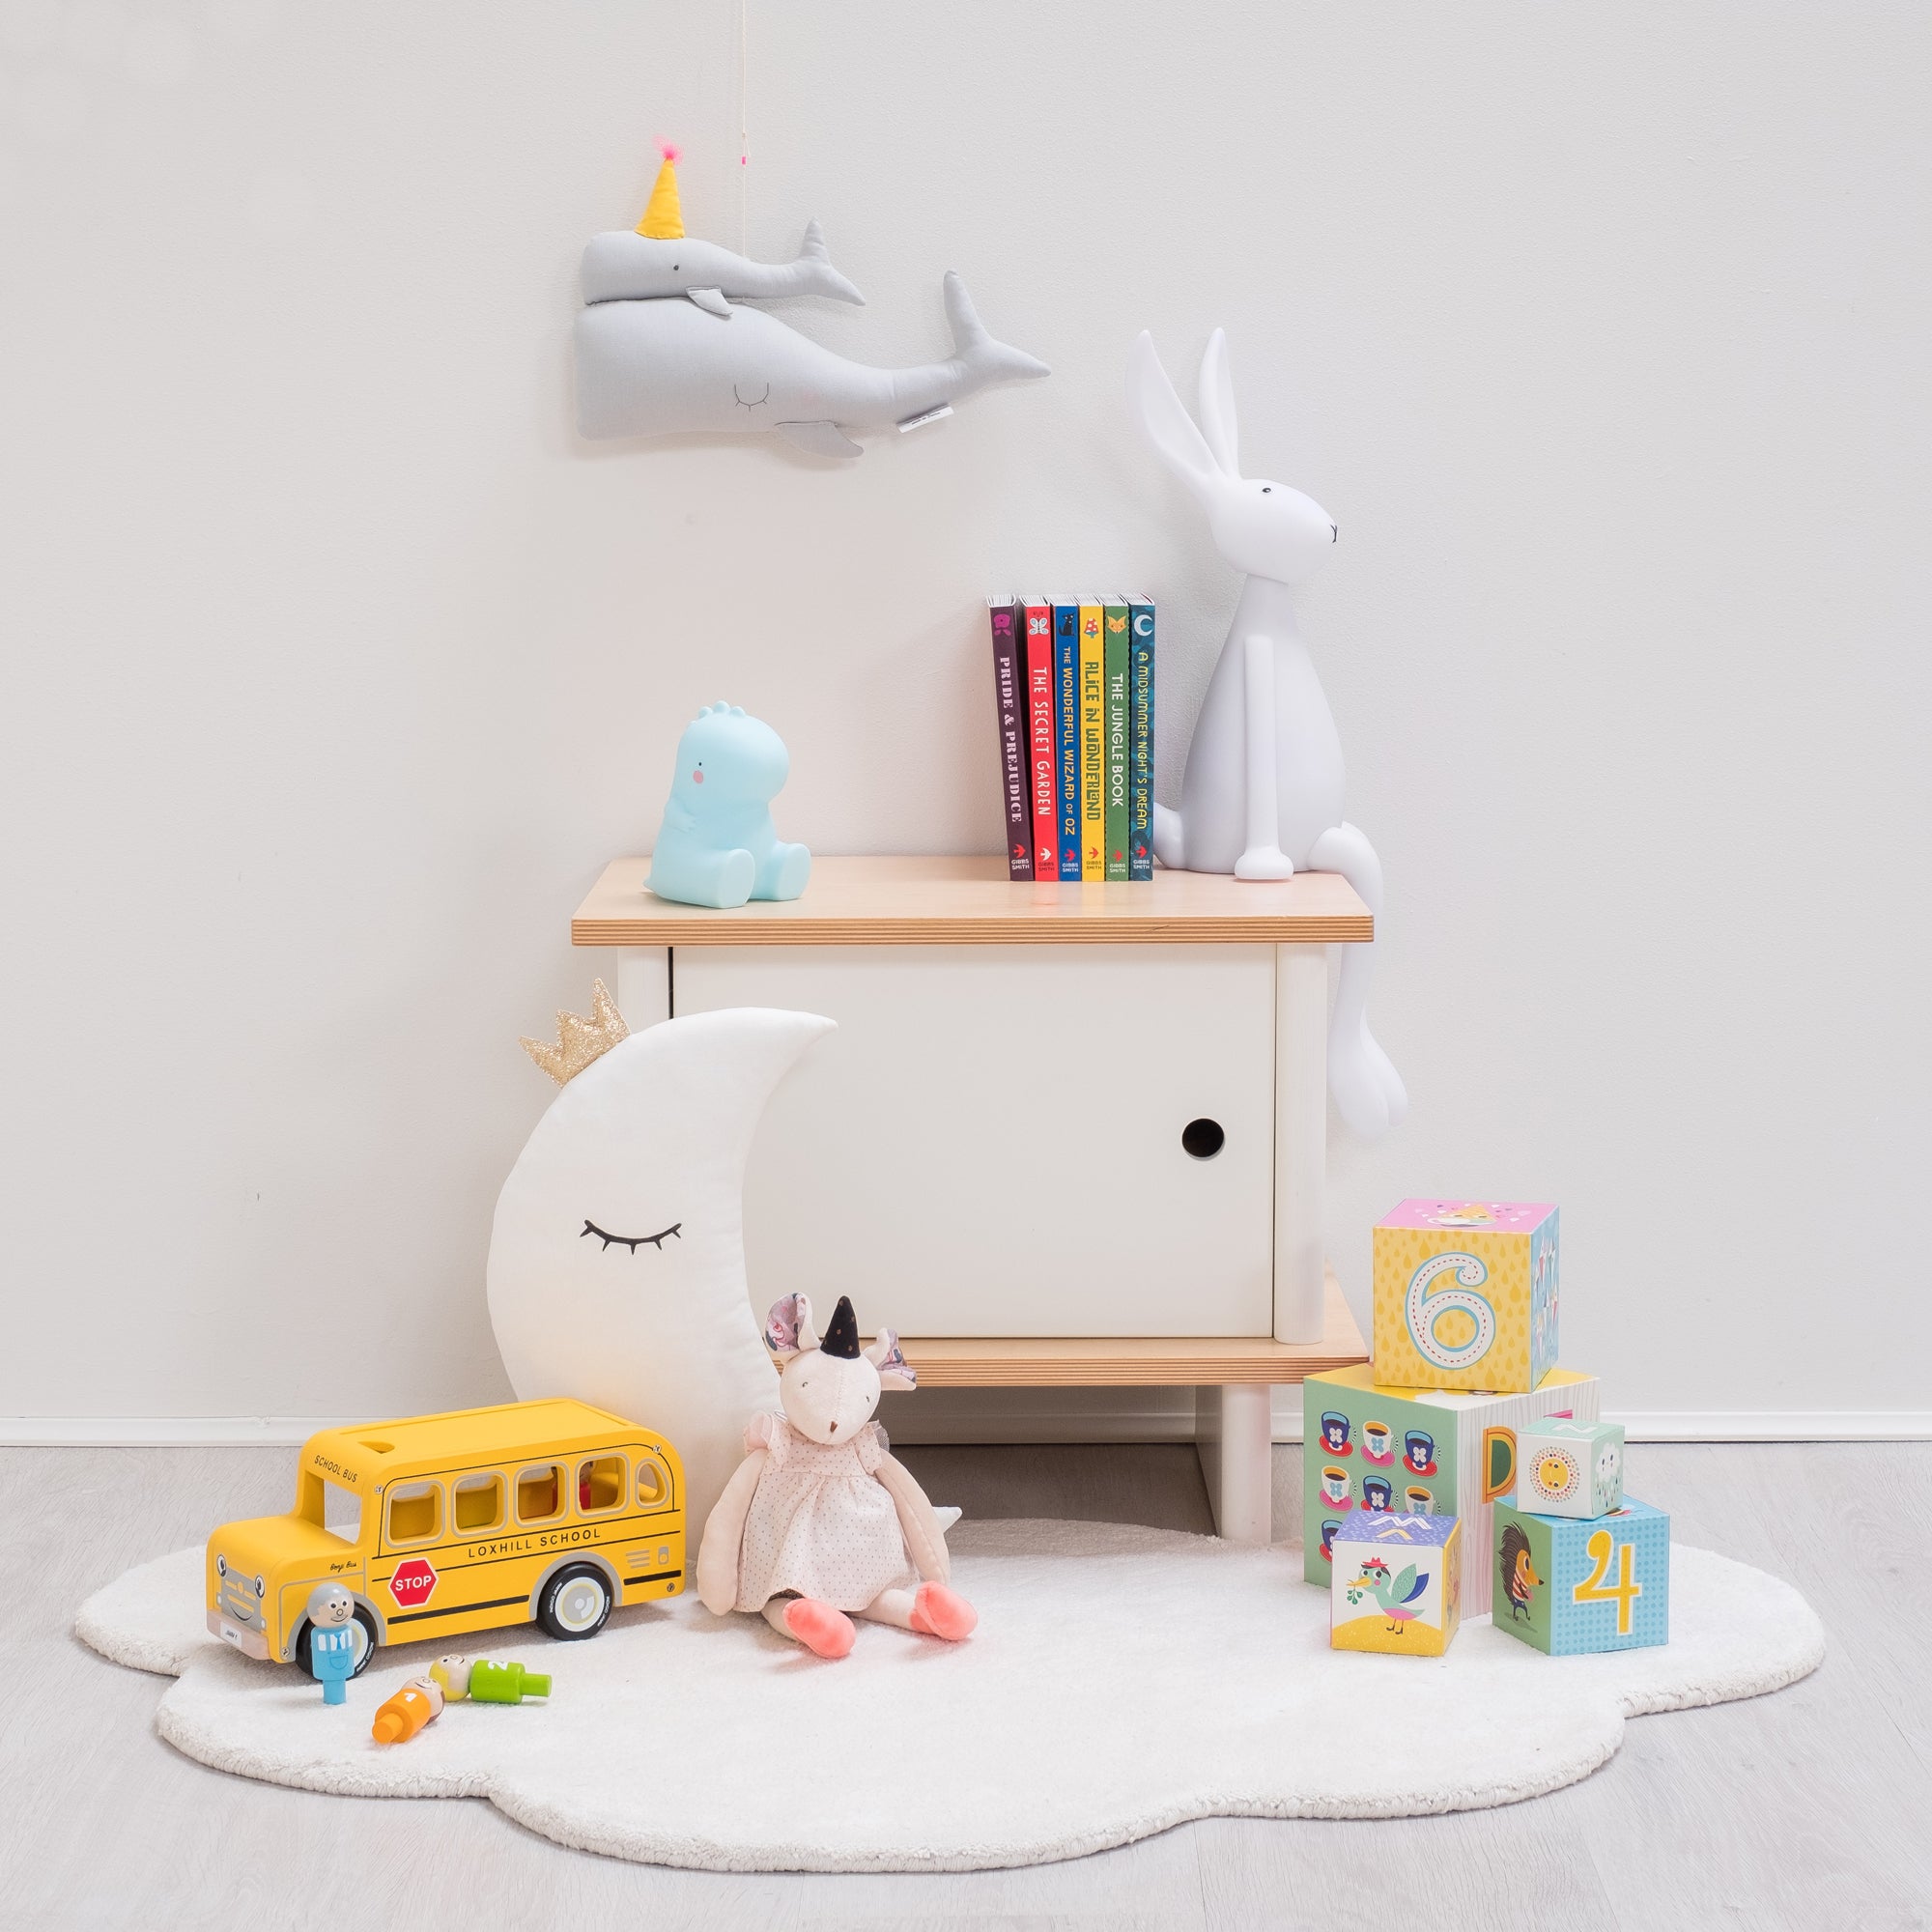 Nursery decor and accessories, styled by Bobby Rabbit.